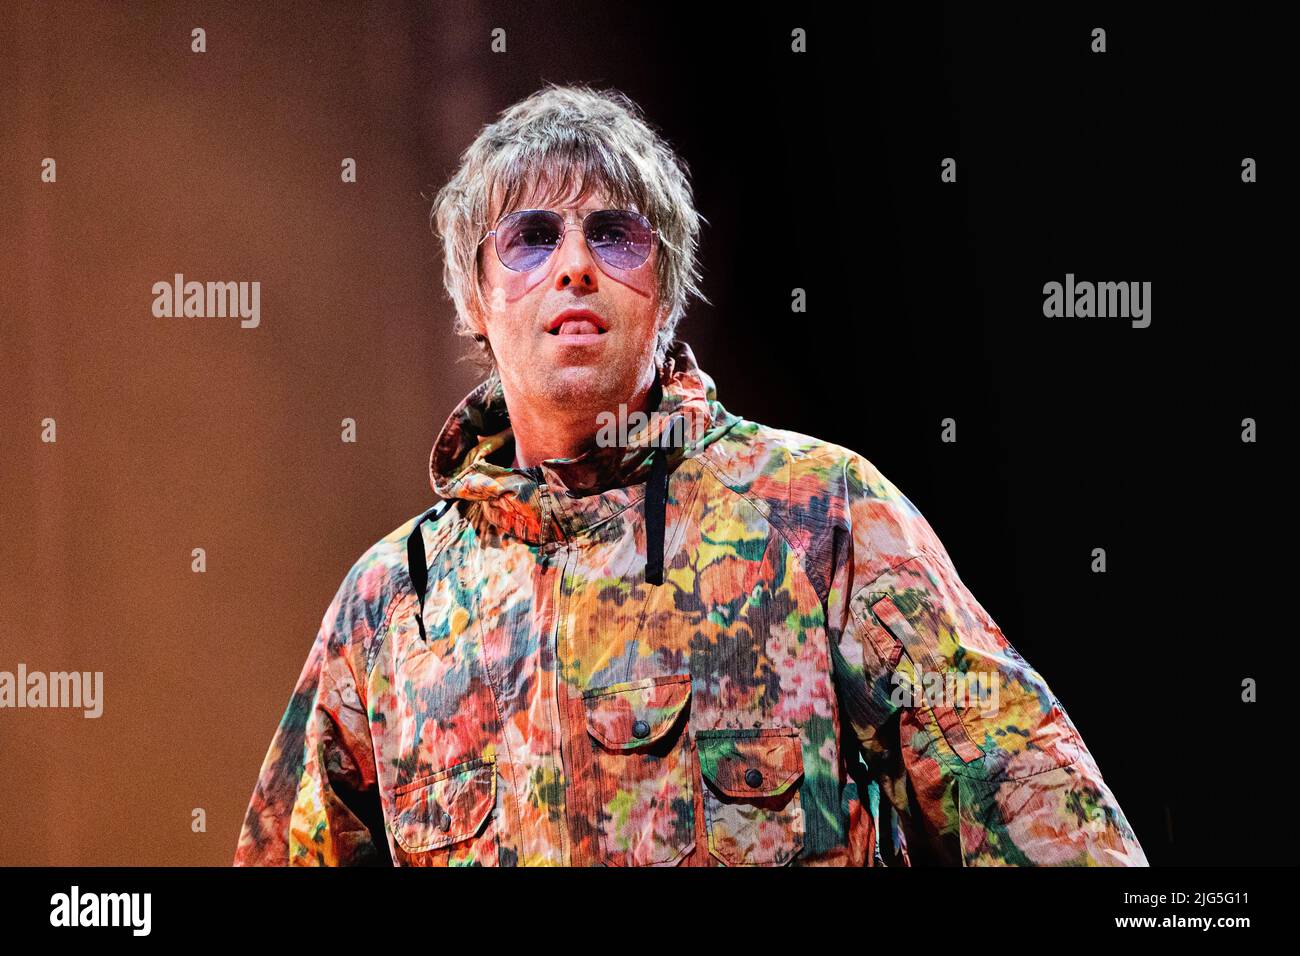 Luca Italie 6 juillet 2022 Liam Gallagher - Live at Lucca Summer Festival © Andrea Ripamonti / Alamy Banque D'Images